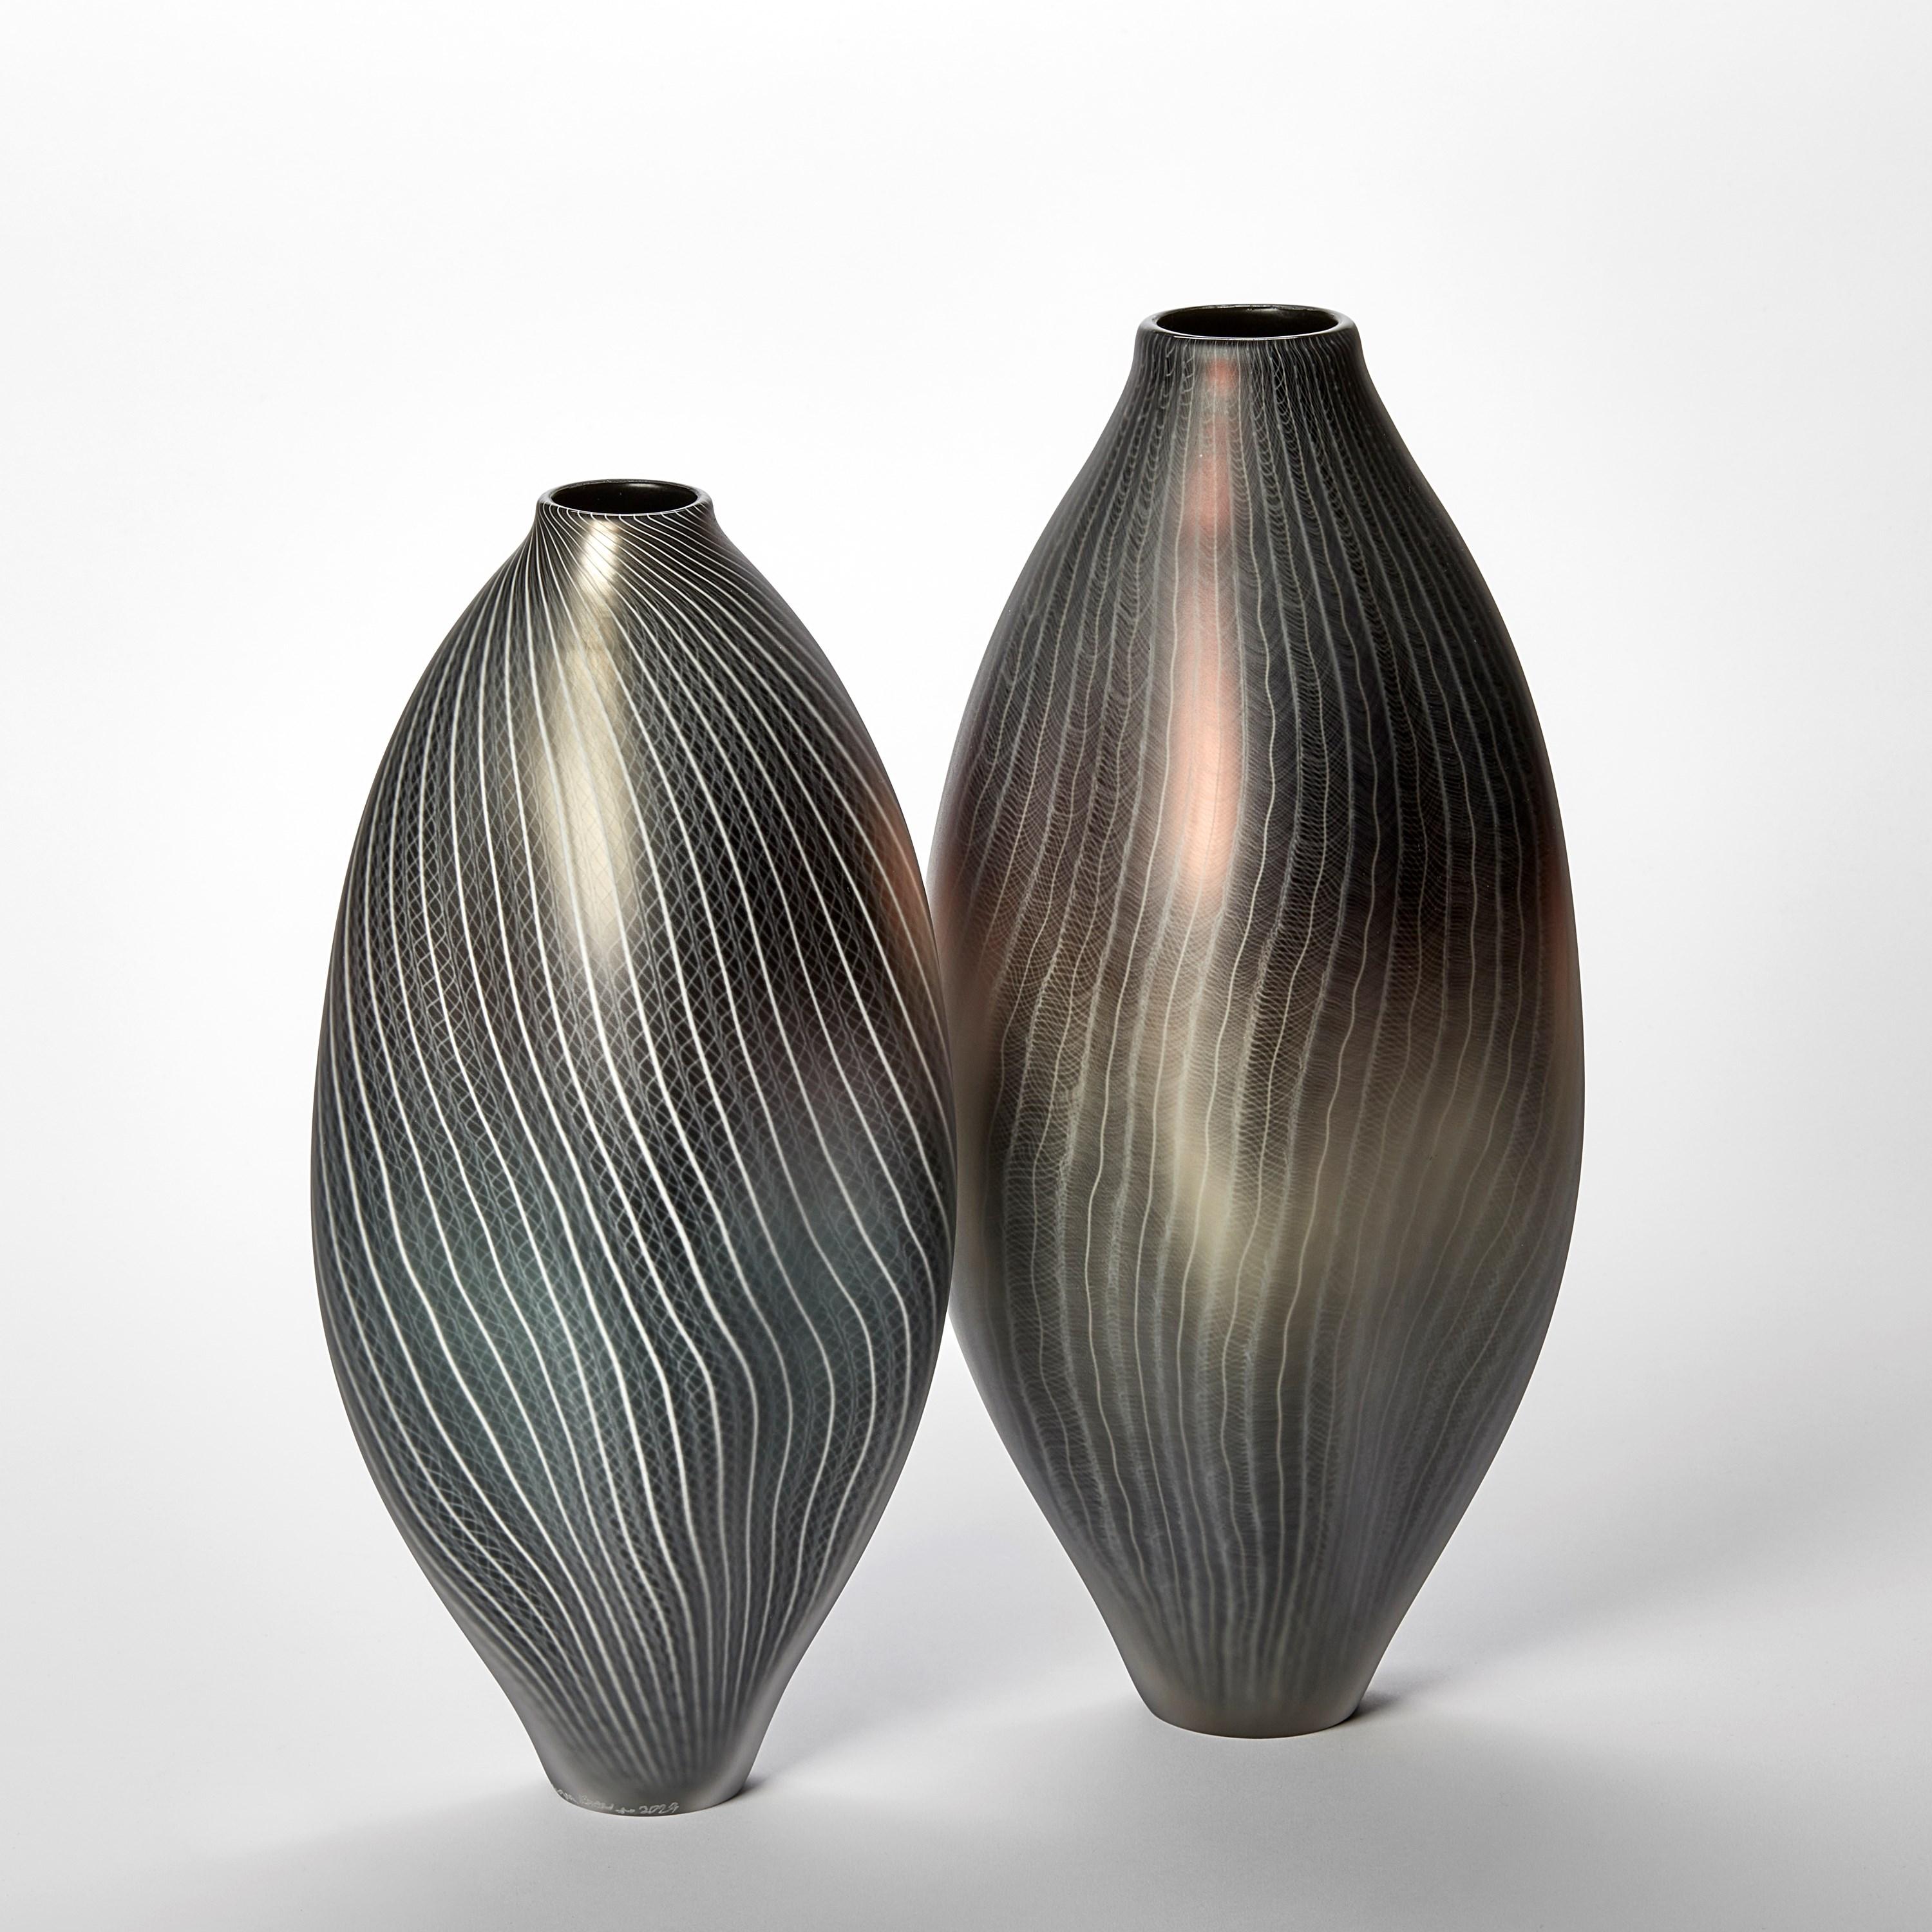 Hand-Crafted Stratiform Aurum 2.0.001, gold & grey handblown glass vessel by Liam Reeves For Sale